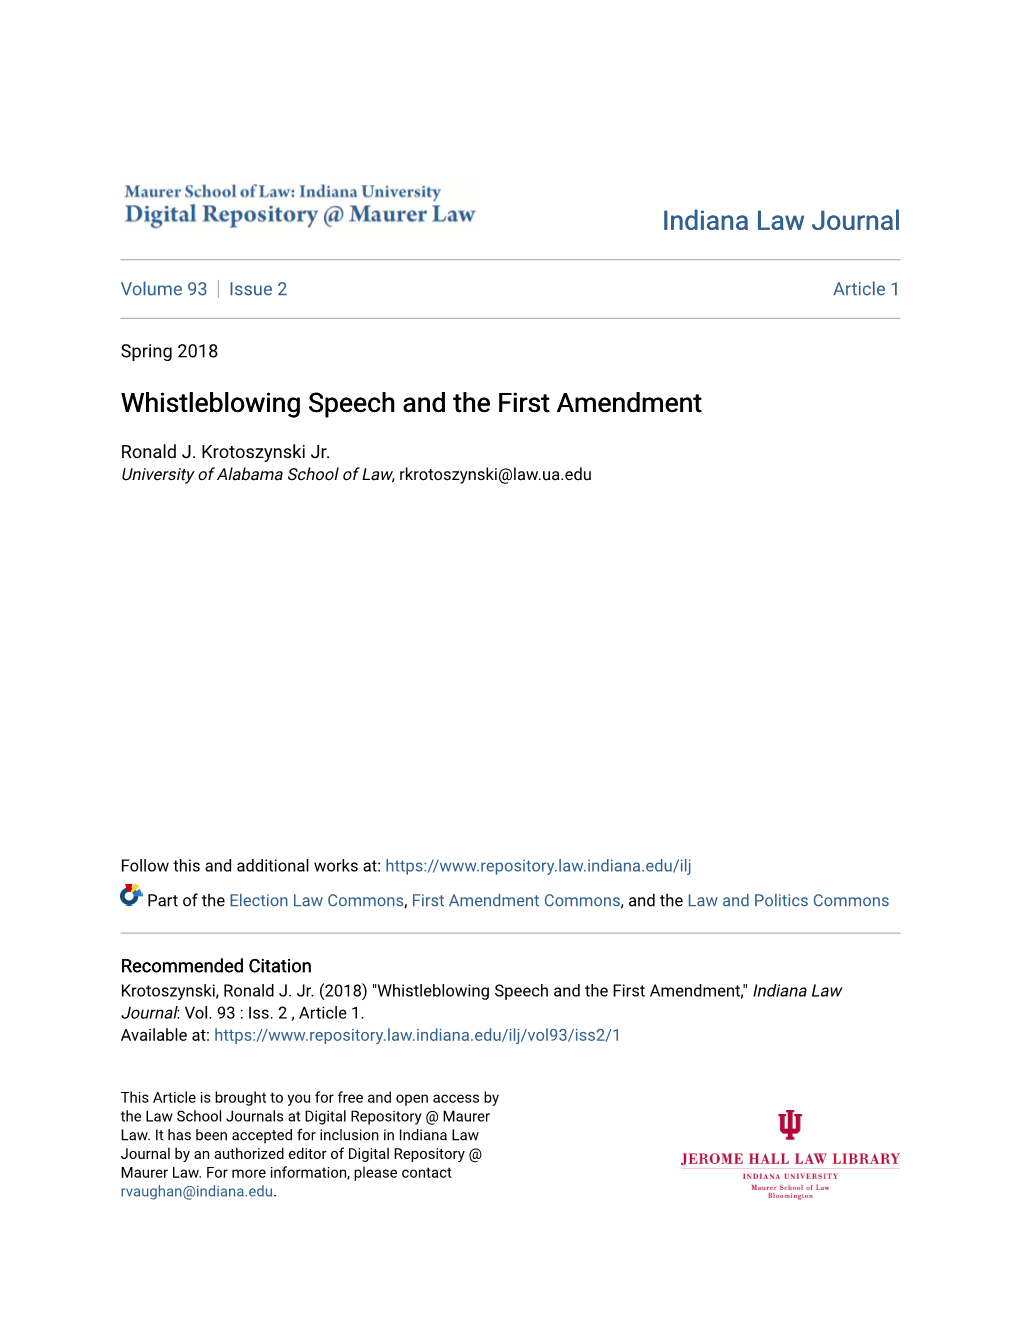 Whistleblowing Speech and the First Amendment